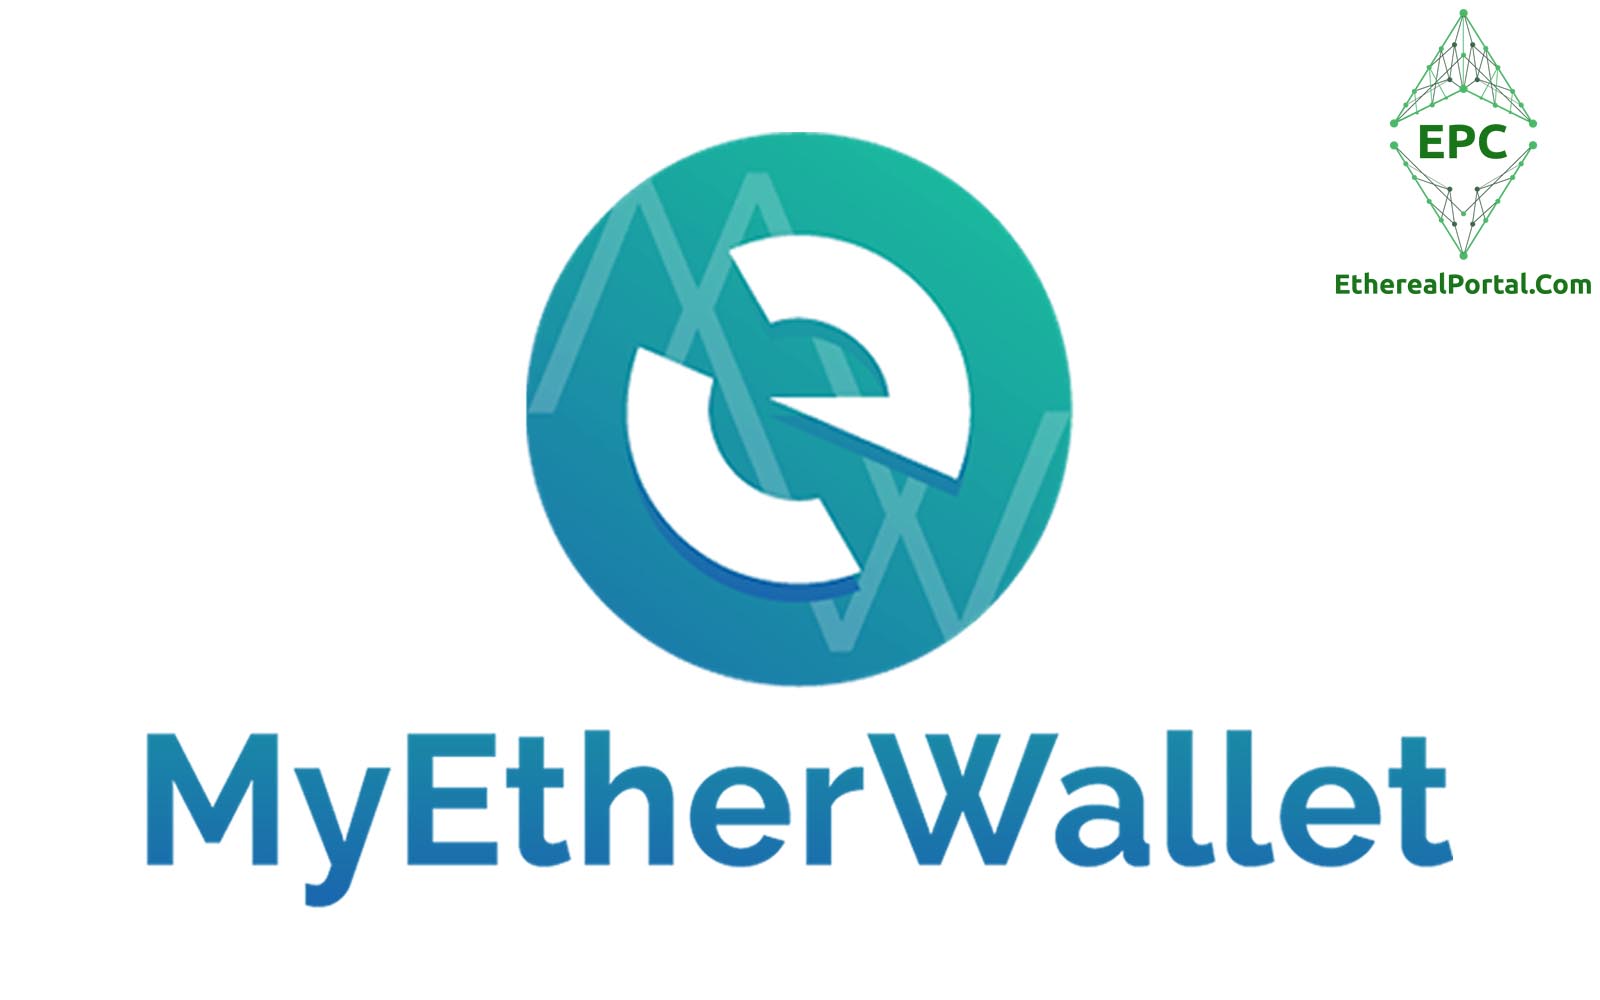 What Is MyEtherWallet?